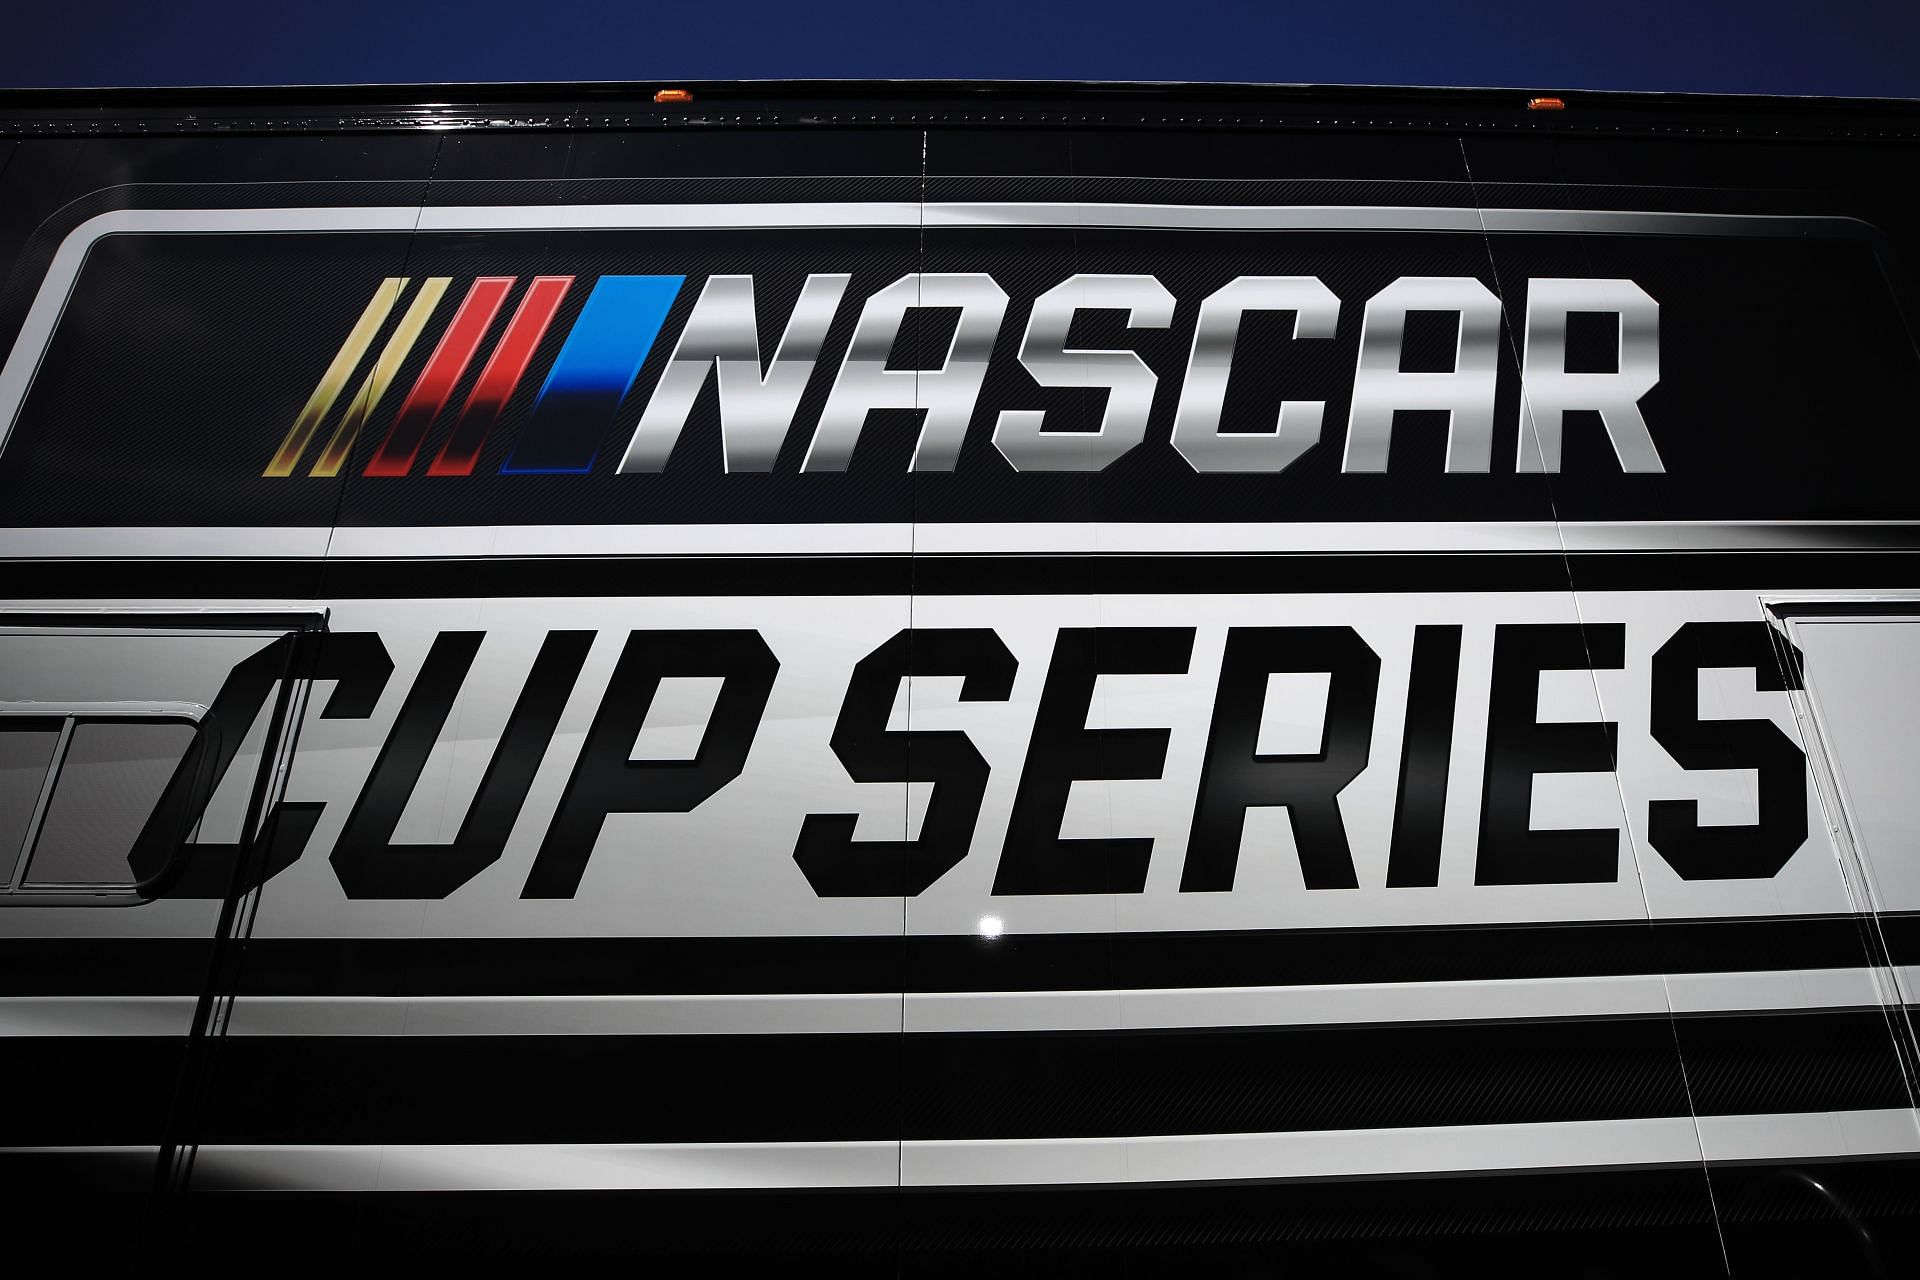 : A general view of the NASCAR Cup Series logo during practice for the NASCAR Cup Series FanShield 500 at Phoenix Raceway. (Photo by Chris Graythen/Getty Images